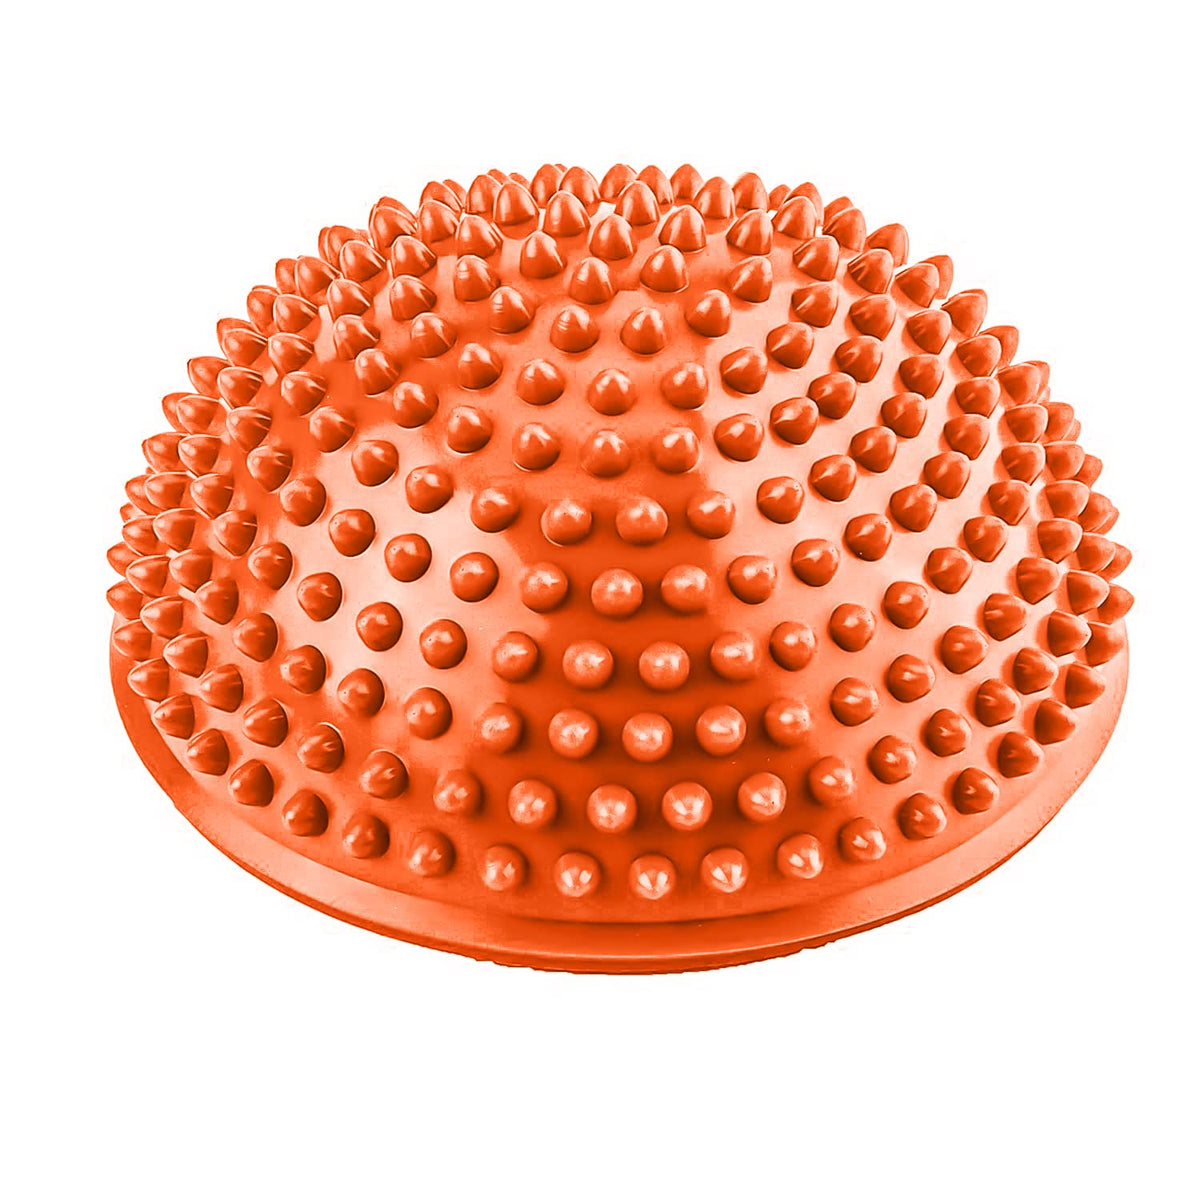 Strauss Hedgehog Balance Pod | Half Spiky Fitness Domes for Kids & Adults | Ideal for Foot Massage, Stability Training, Muscle Balancing Therapy, Yoga Gymnastics Exercise, Occupational Therapy | Stability Balance Trainer Dot,(Orange)